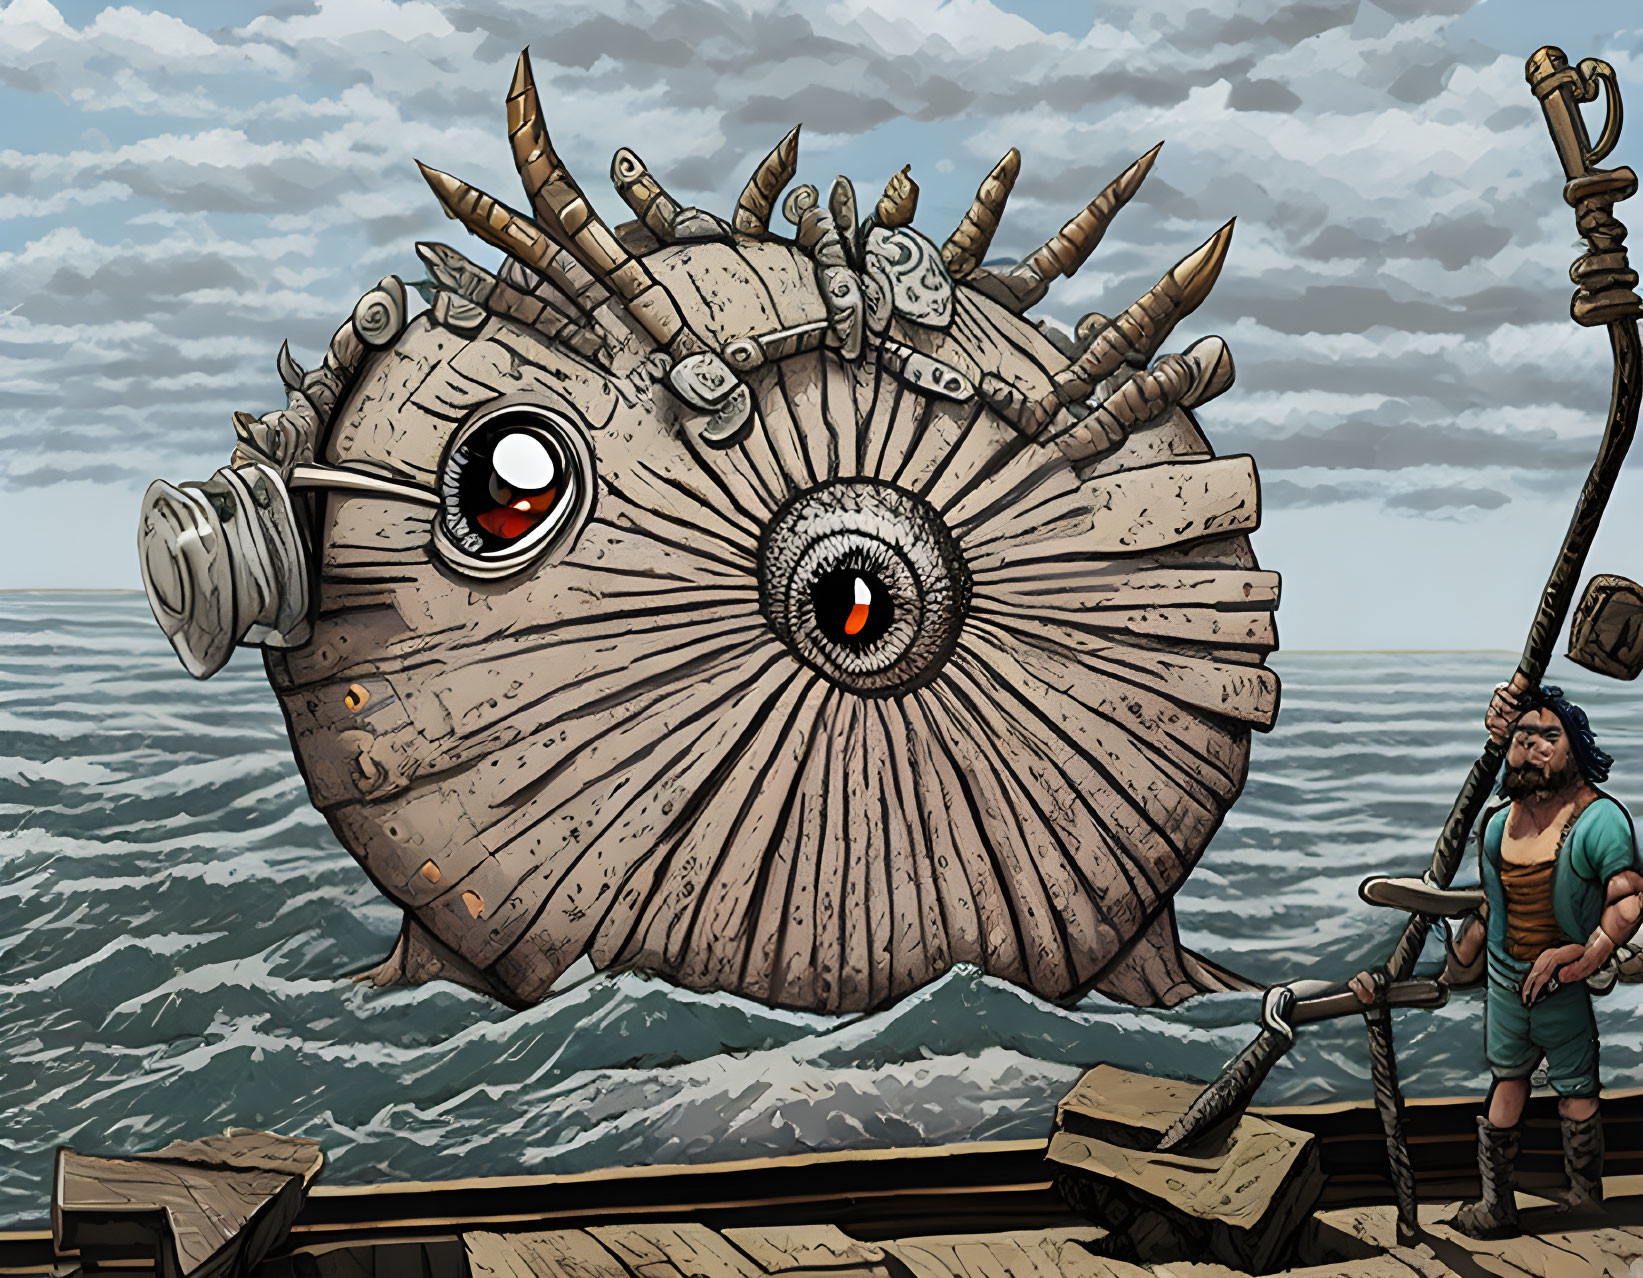 Ugly cyclop with one big eye, raising from the sea